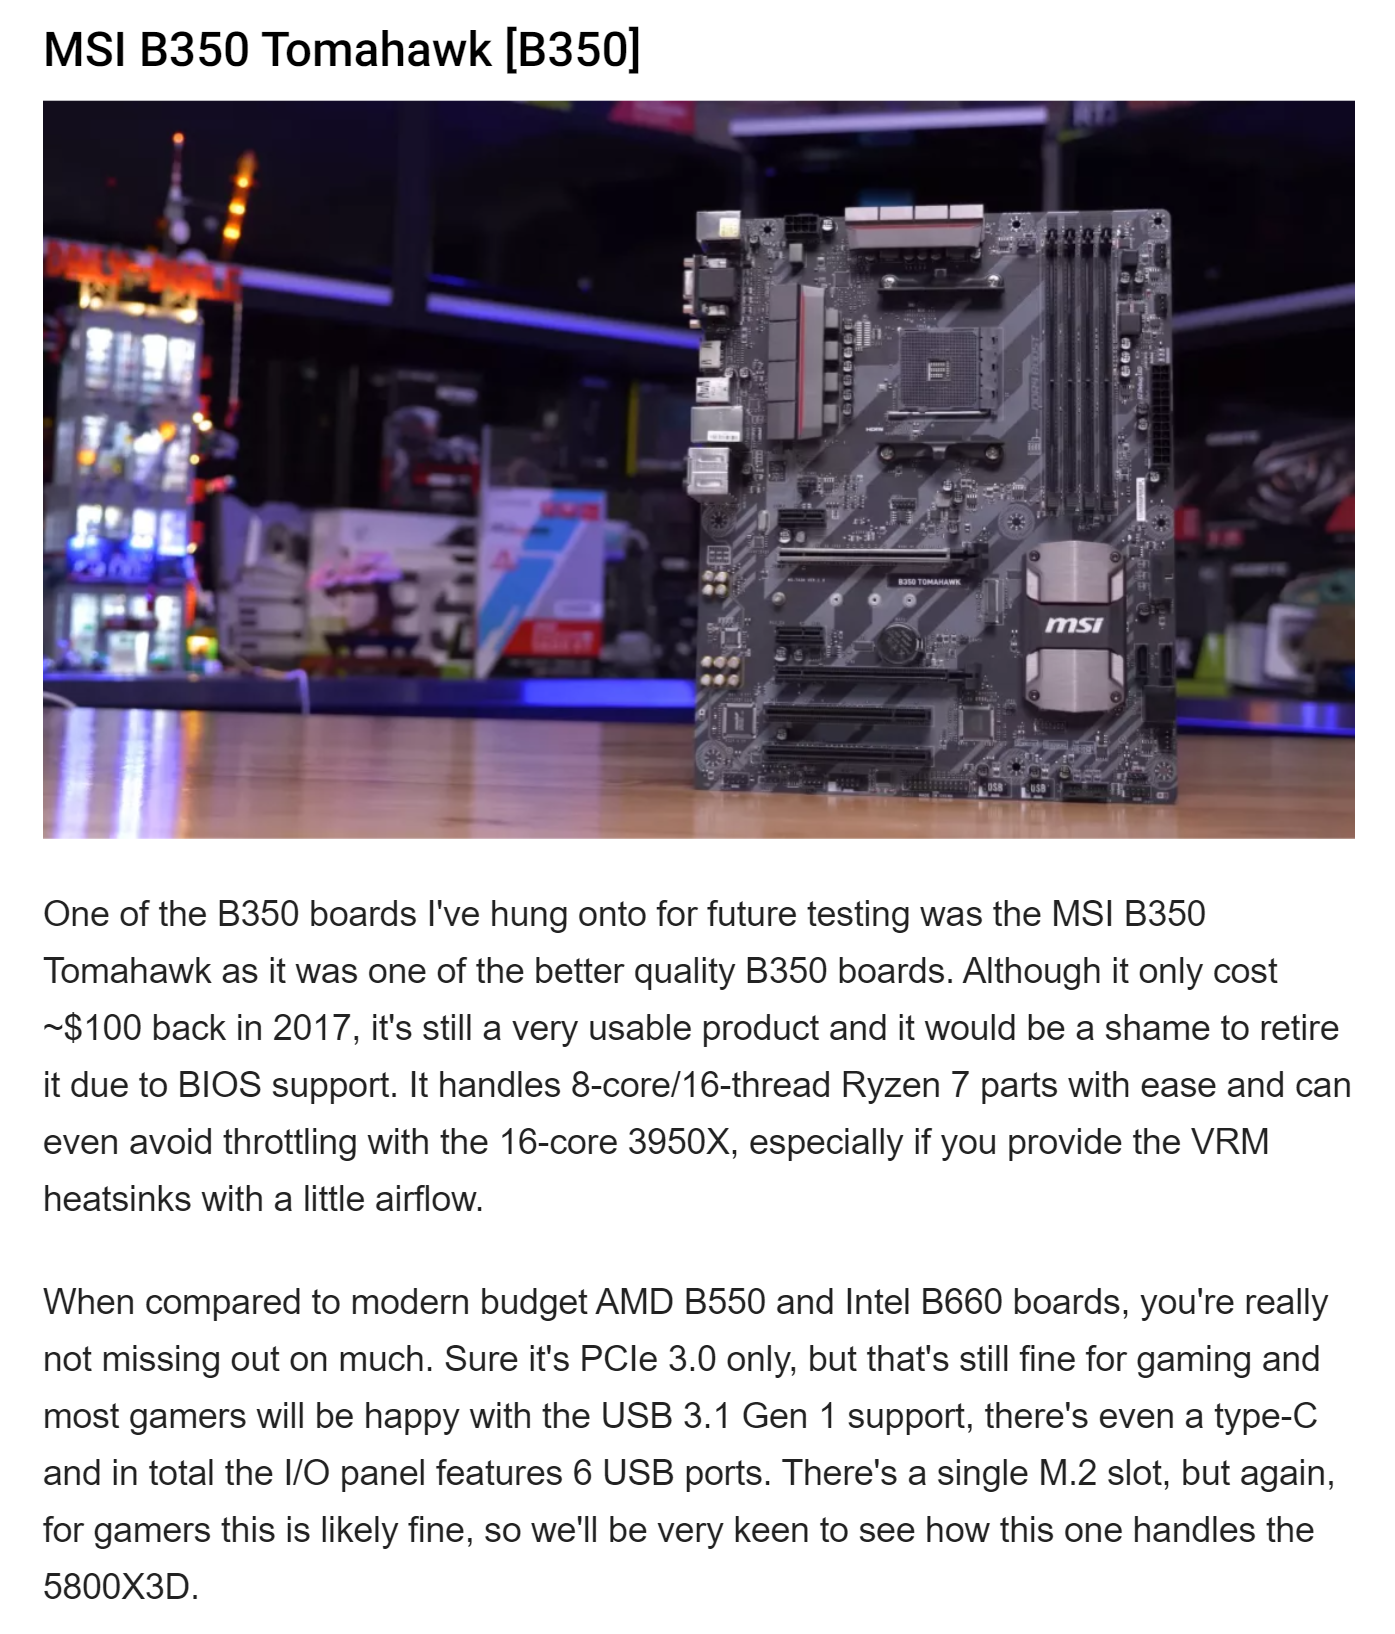 5800x3d on a MSI B350 Tomahawk - PC Hardware and Related Software - ED  Forums